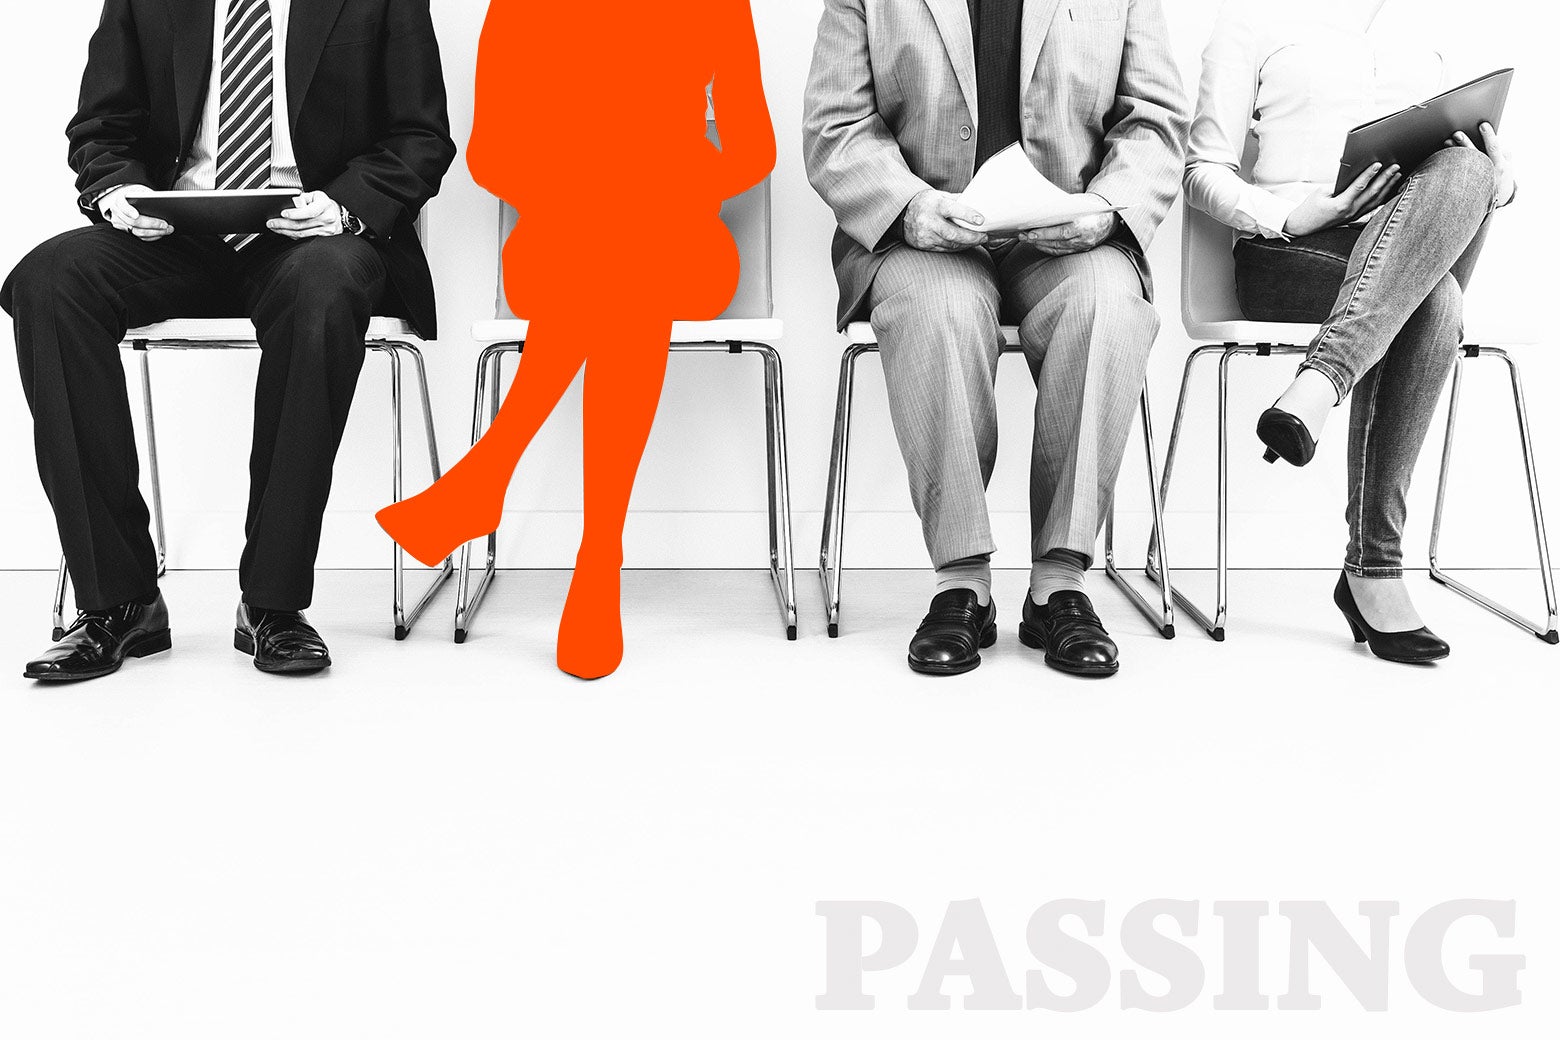 People waiting for a job interview, with one woman silhouetted out in orange.